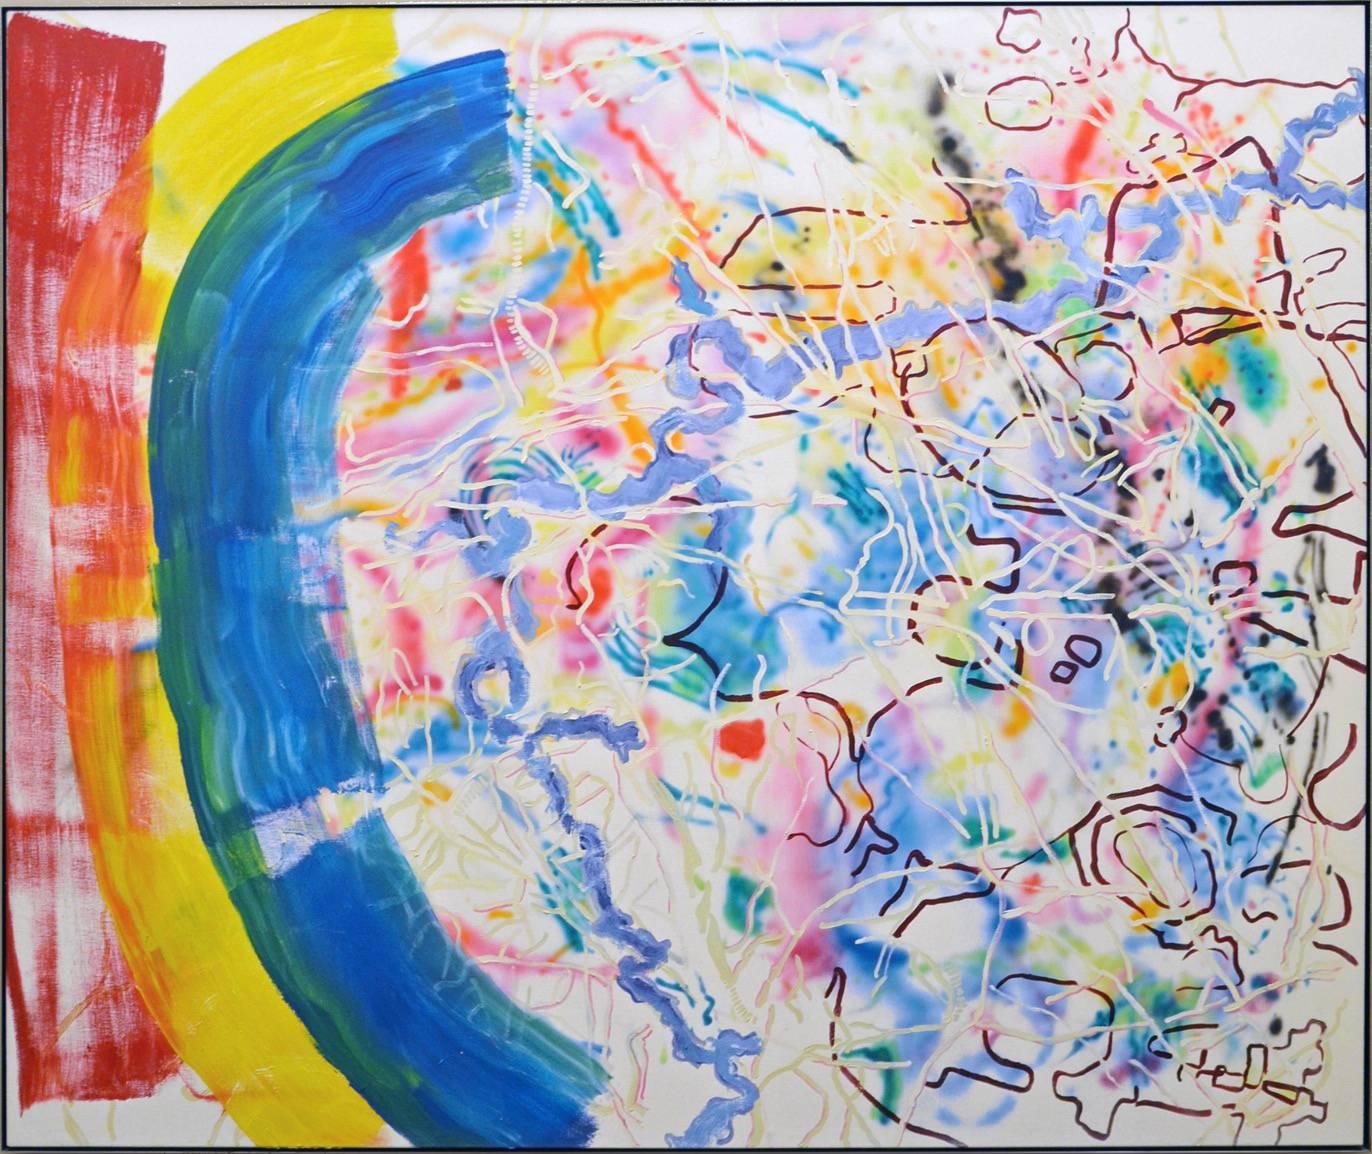 "RBY" 1980 oil/canvas - Large Very colorful abstract yellow red blue green white